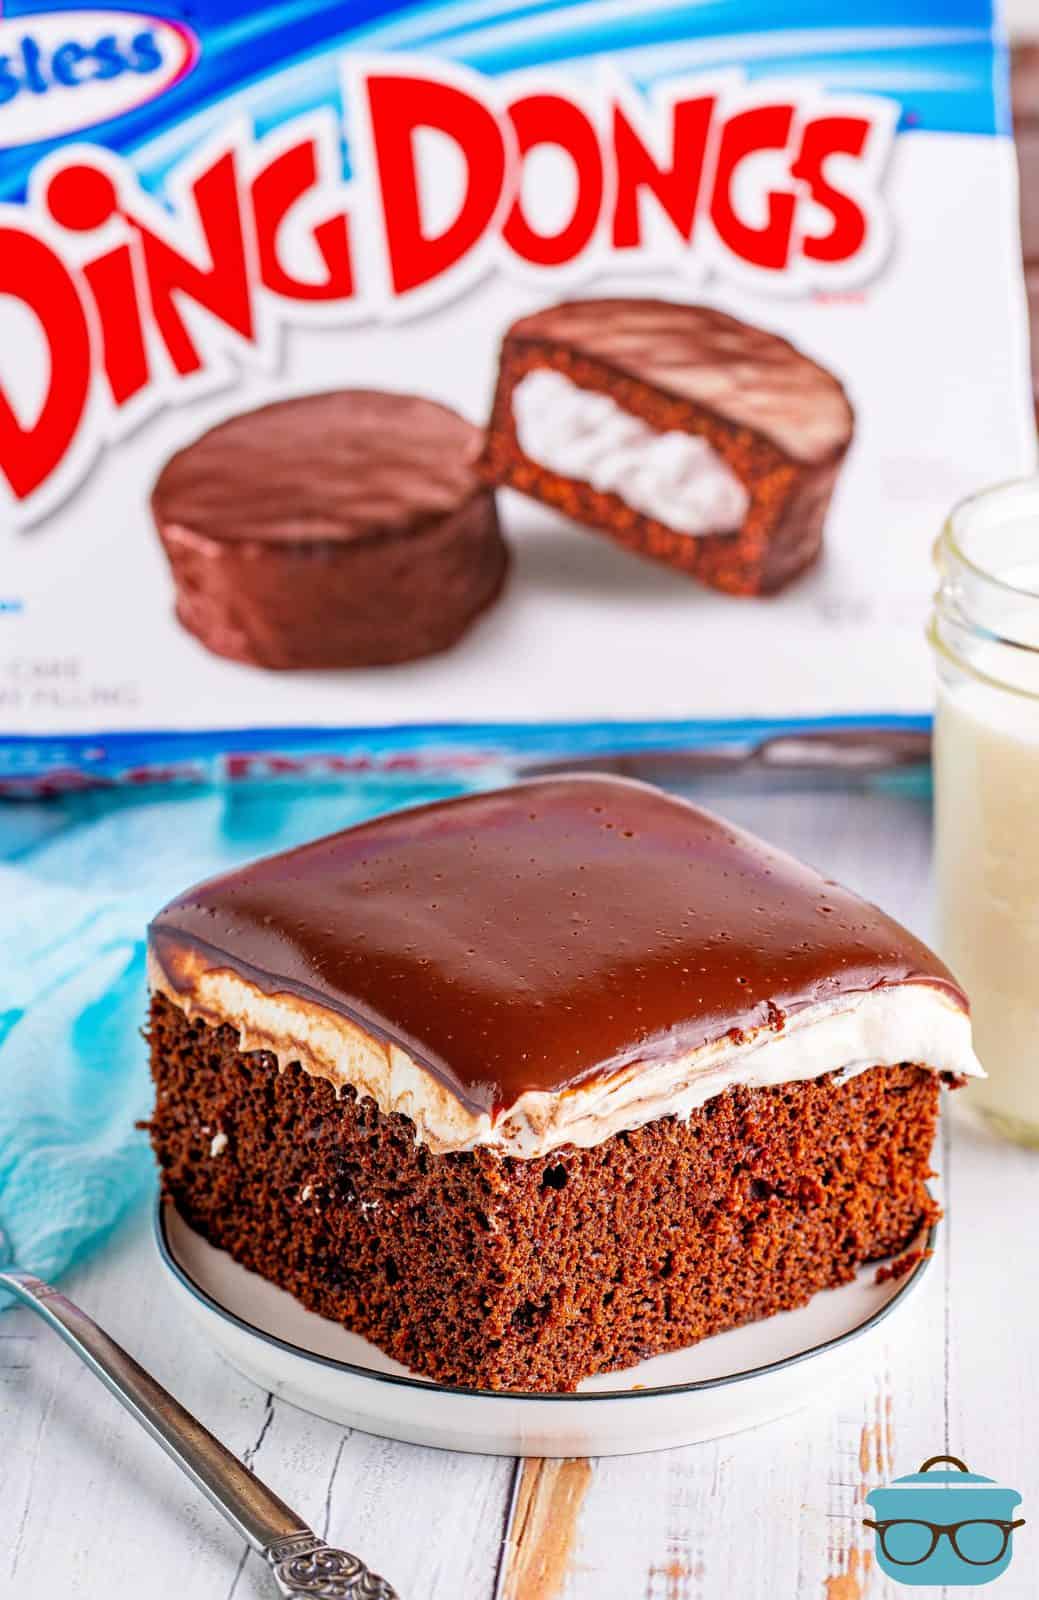 Slice of Ding Dong Cake on white plate in front of a box of Ding Dongs.